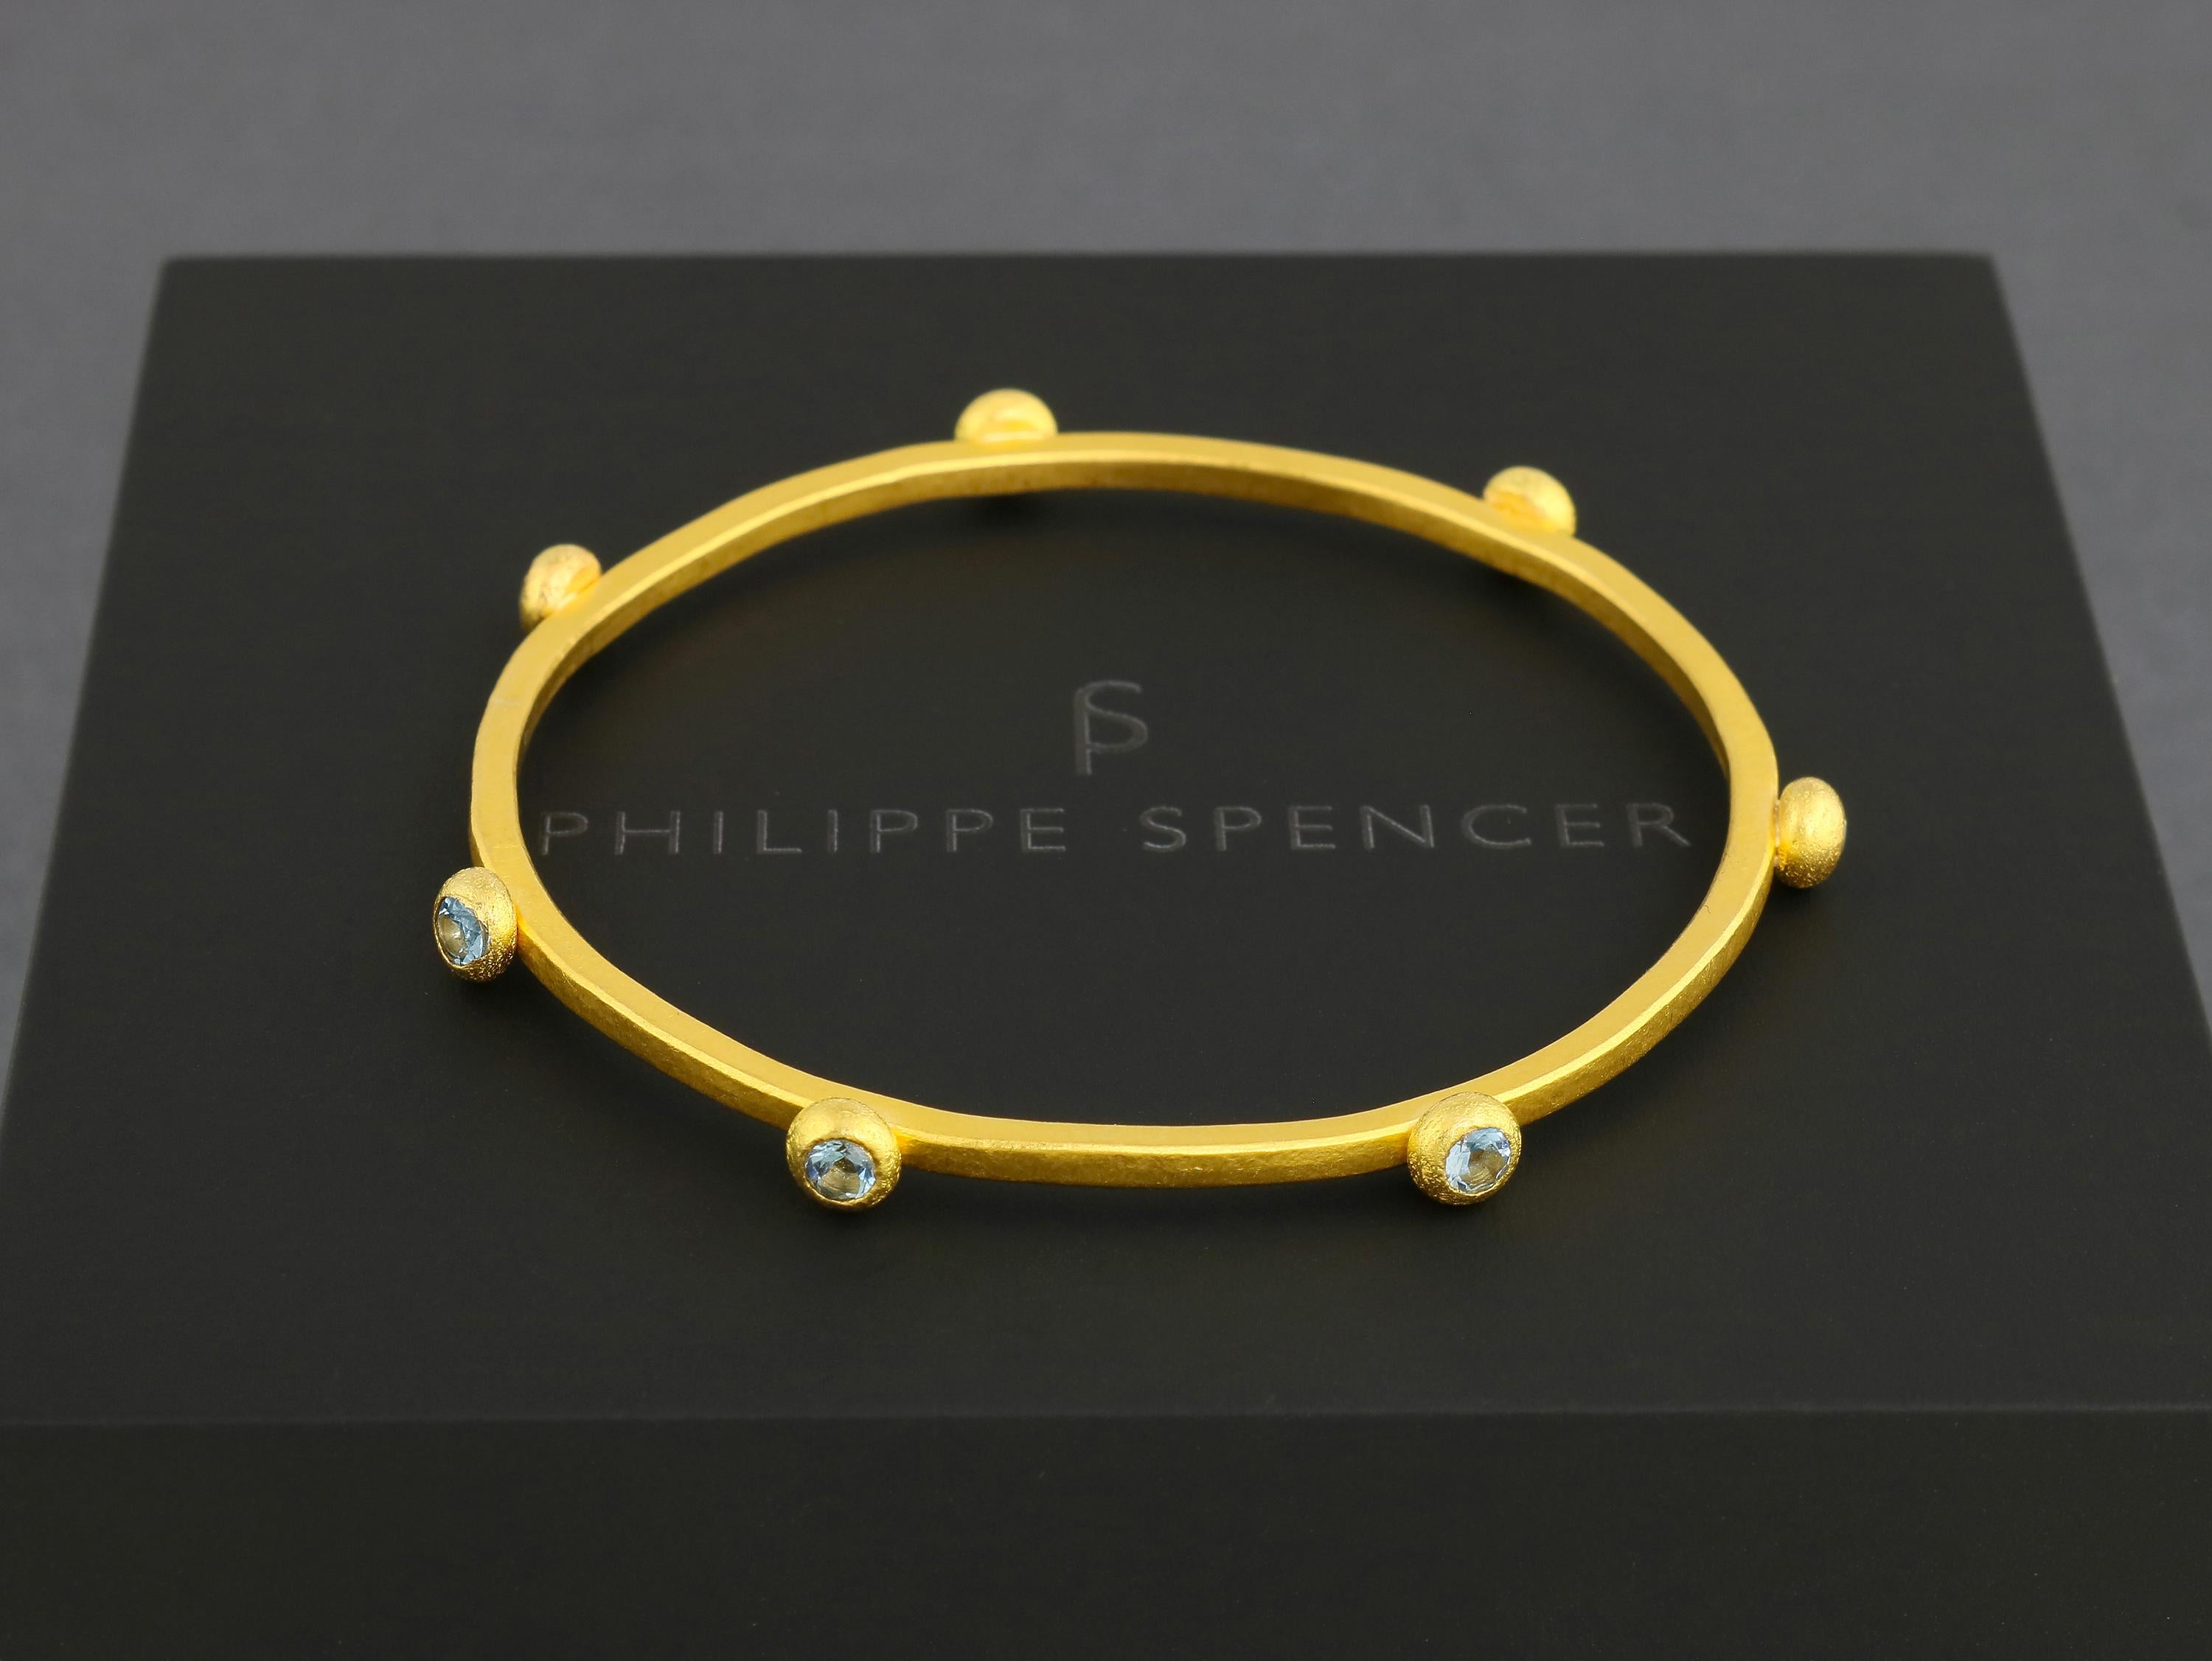 PHILIPPE SPENCER - Solid 24K Gold 2.5mm X 2.5mm Completely Hand & Anvil-Forged Bangle with 7-Quantity Aquamarines, 1.27 Ct. Total, set in Pure 22K Gold Drops. A truly unique One-Of-A-Kind work of art.  Our apologies in advance, this item is not